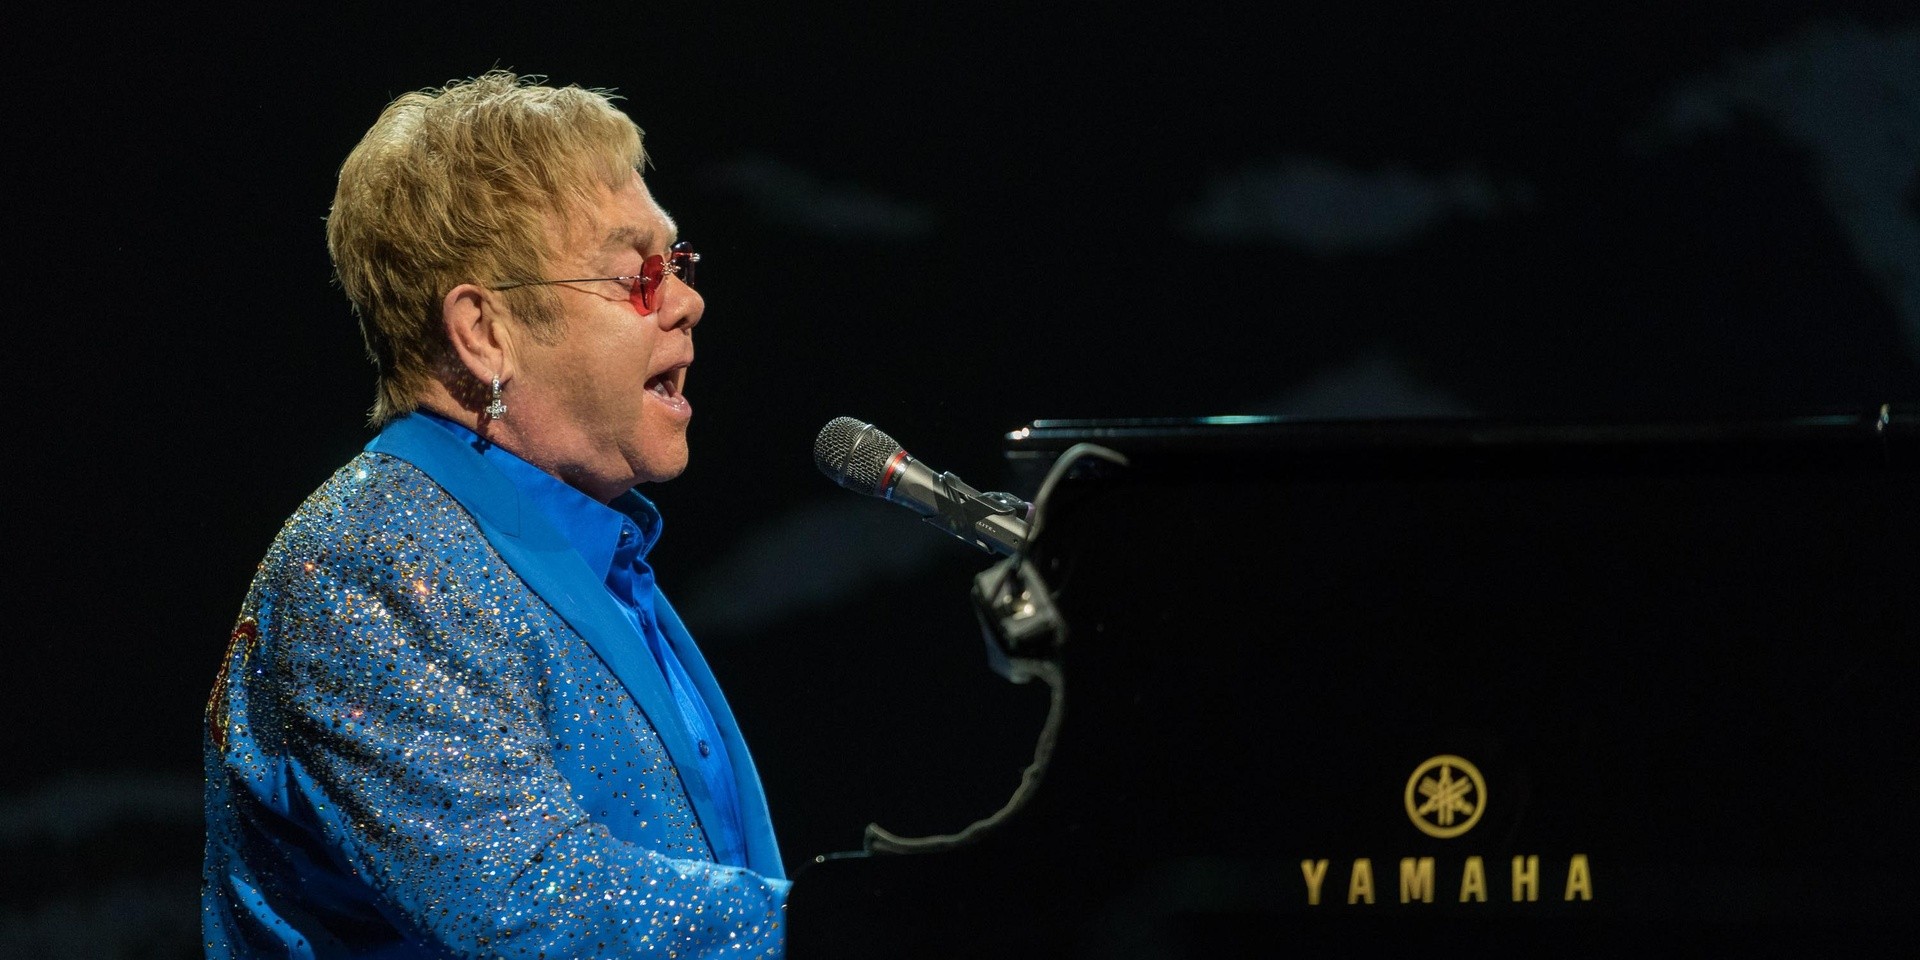 Elton John will retire from touring after playing more than 300 shows worldwide over 3 years